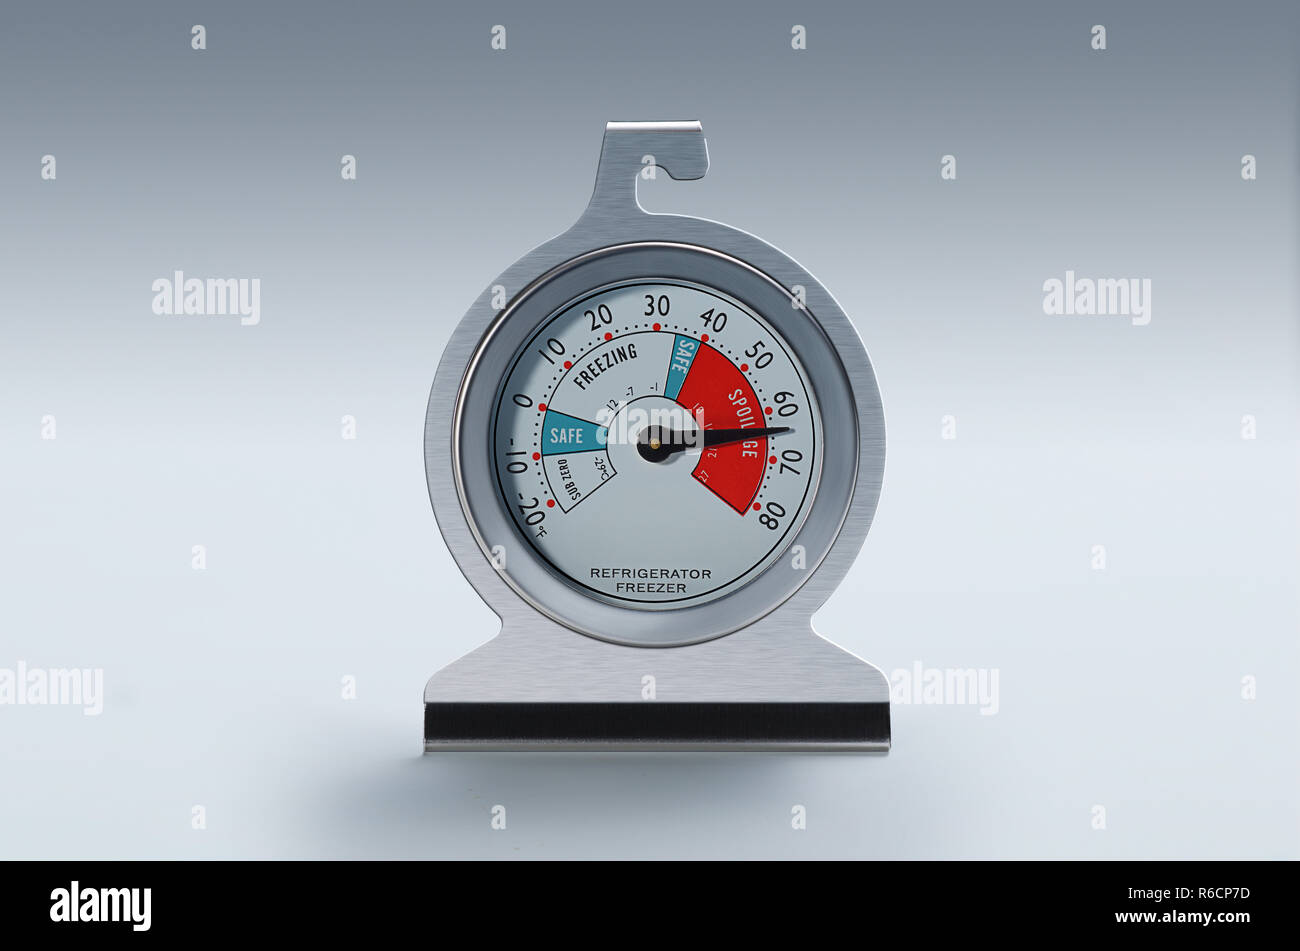 Front view of fridge temperature gauge with needle display, plain background Stock Photo